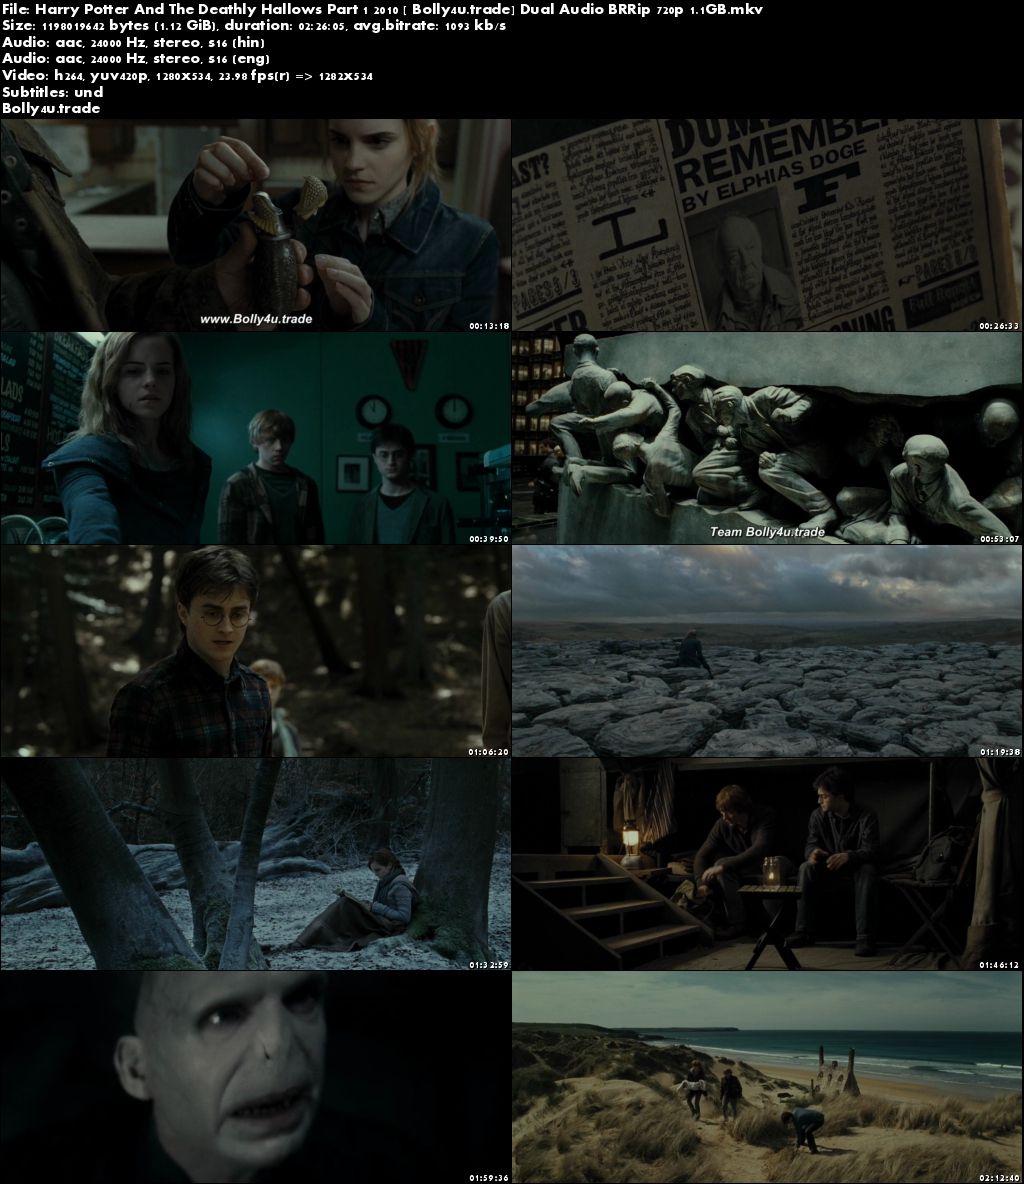 Harry Potter And The Deathly Hallows Part 1 2010 BRRip Hindi Dual Audio 720p Download